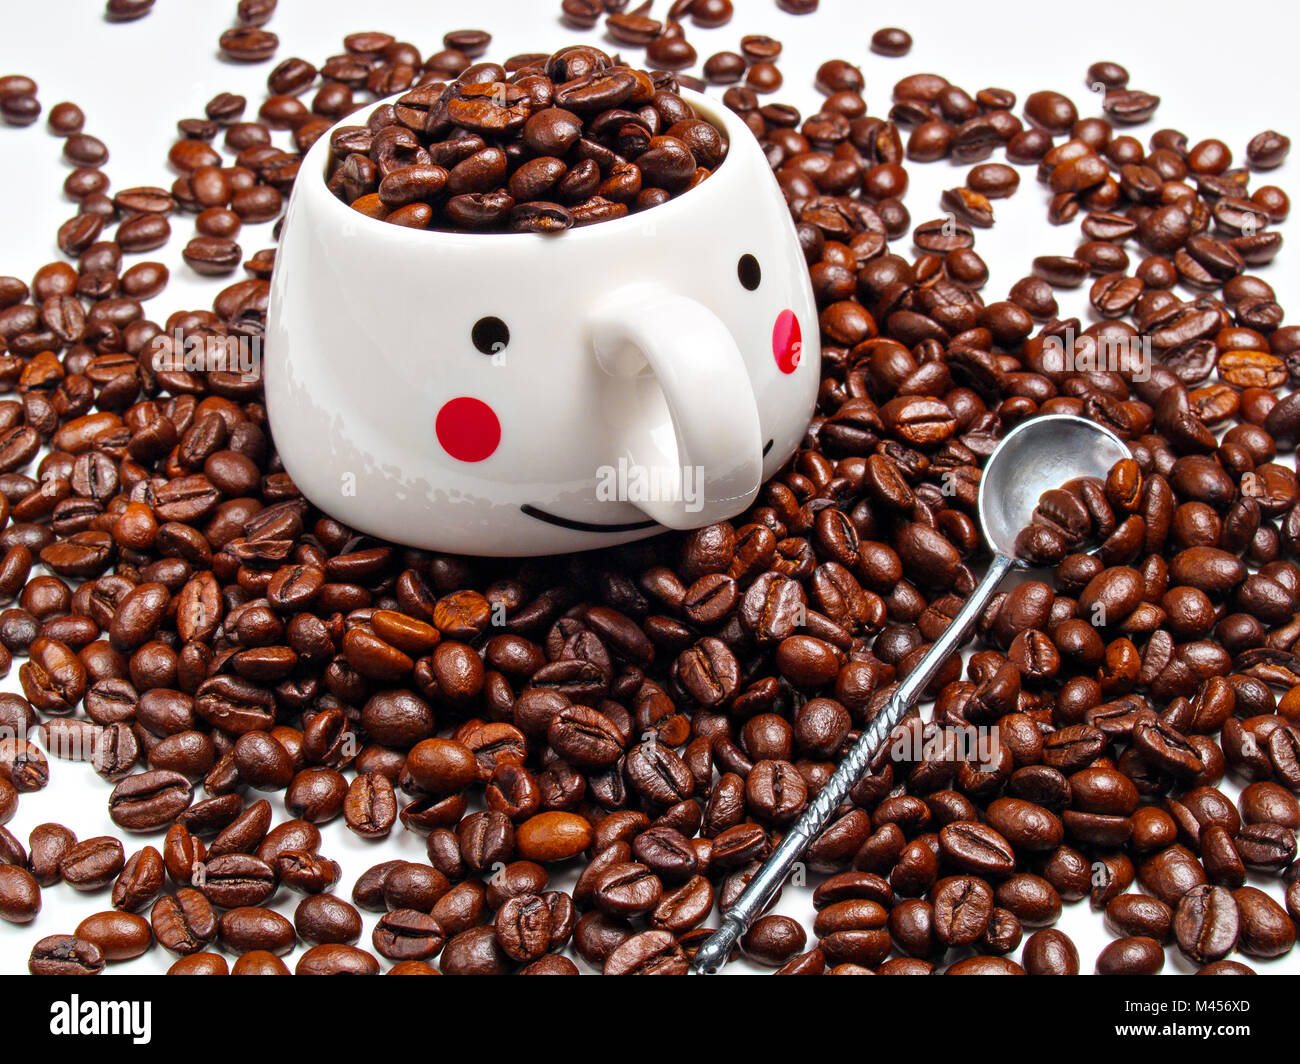 A white coffee mug filled with grains of roasted coffee stands on a pile of coffee beans Stock Photo